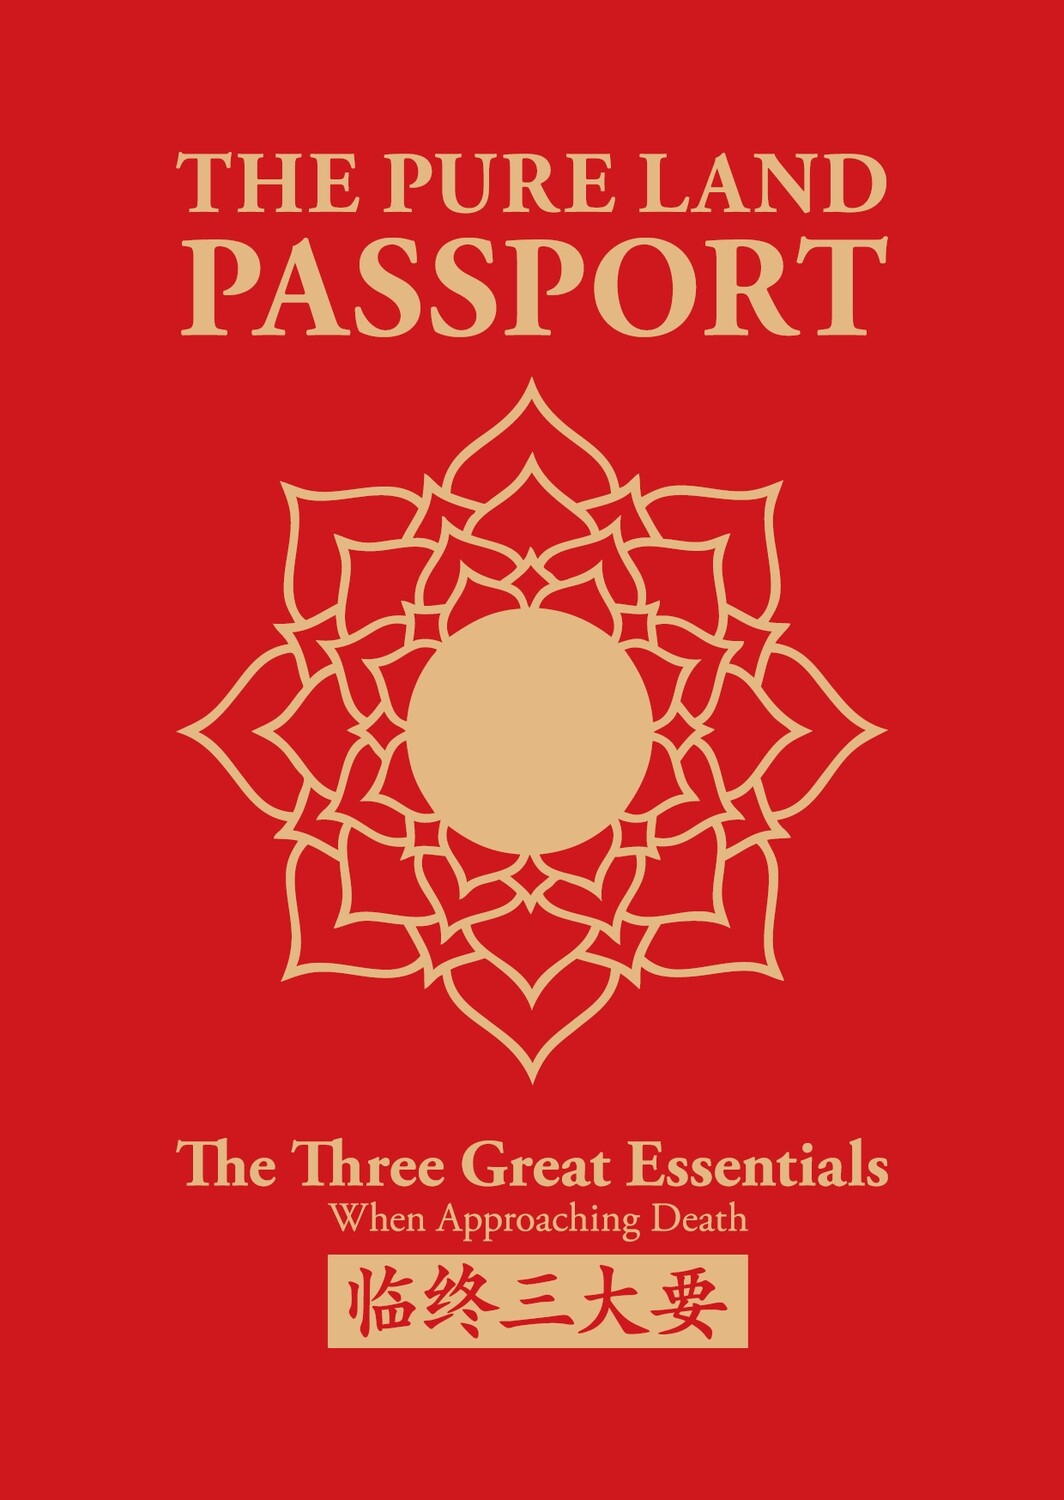 [NEW EDITION] The Pure Land Passport : The Three Great Essentials When Approaching Death (临终三大要)